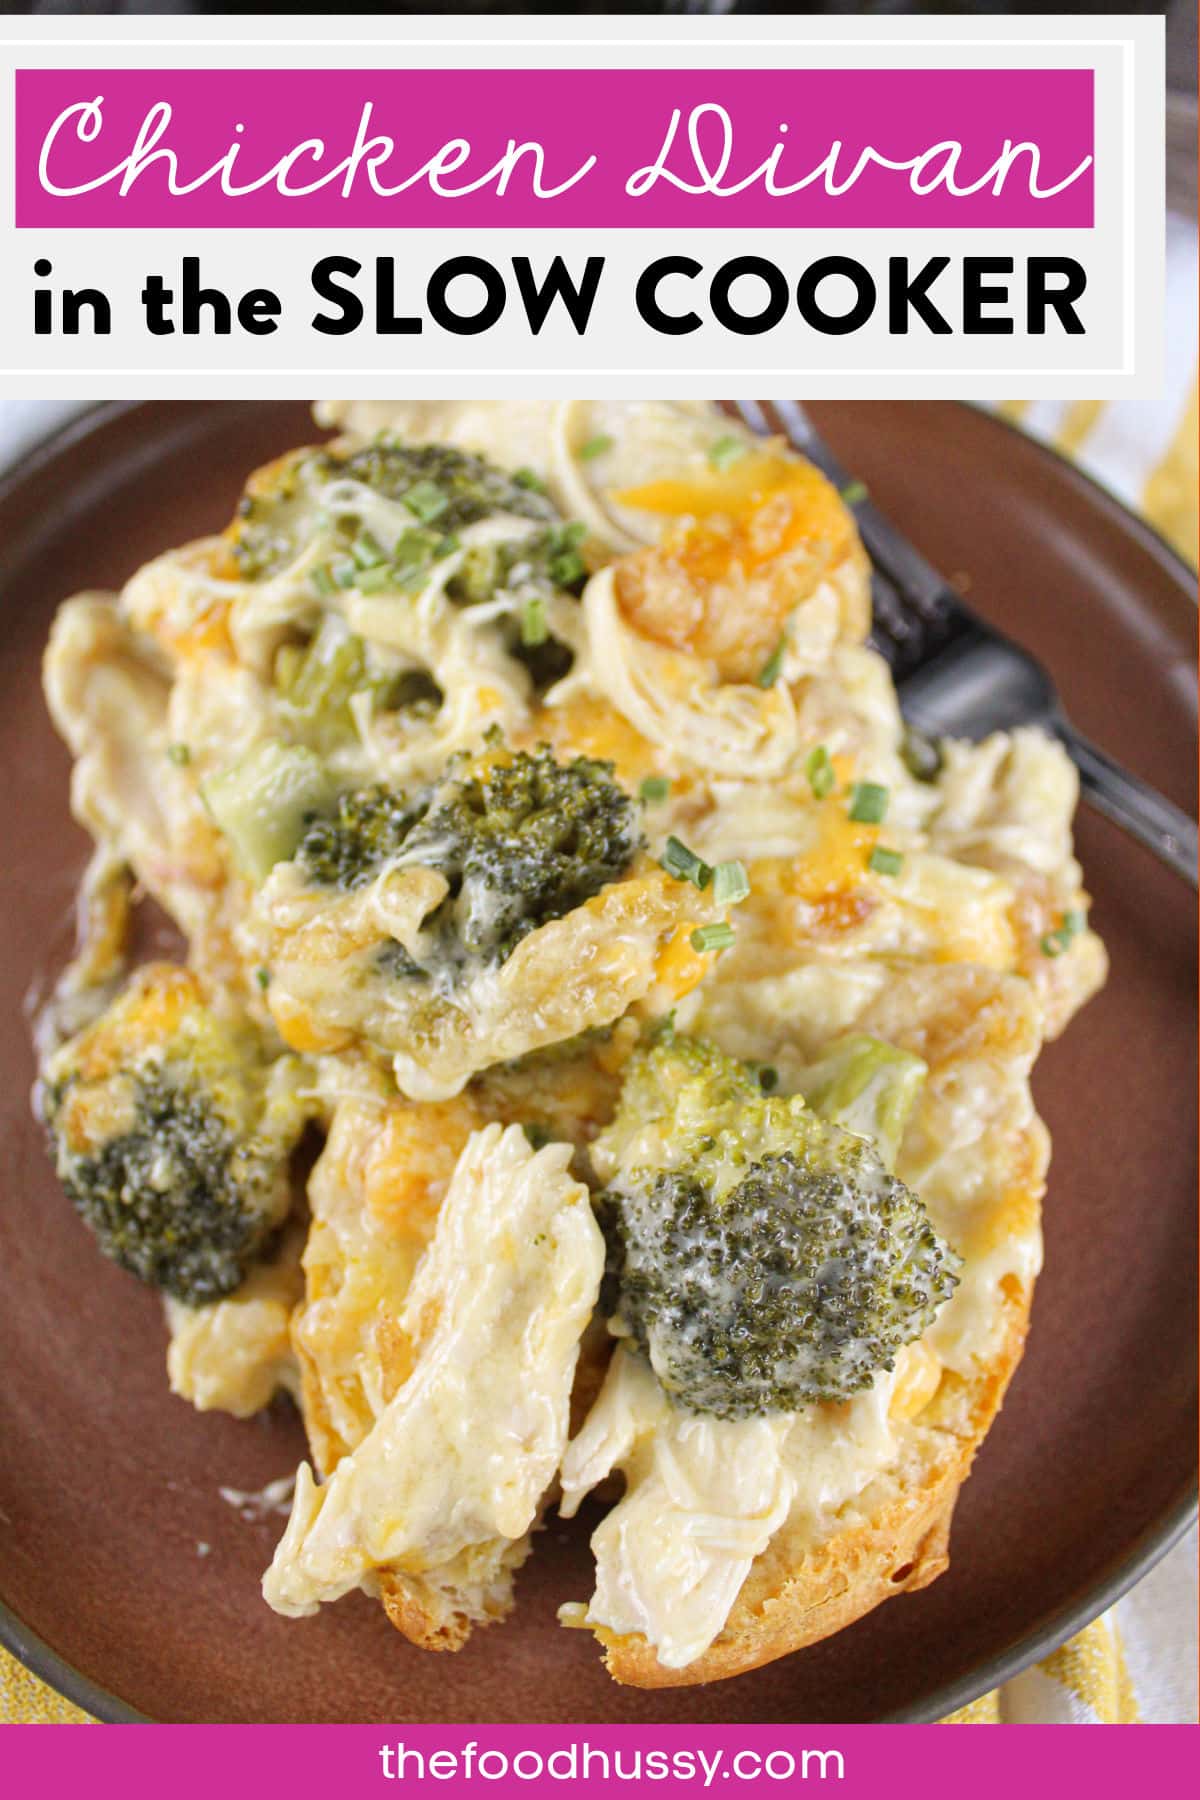 Chicken Divan in the Slow Cooker is a delicious comfort food casserole! Shredded chicken breast coated in a creamy gravy and topped with broccoli, cheese and a little crunch! This dish is the taste of home.  via @foodhussy